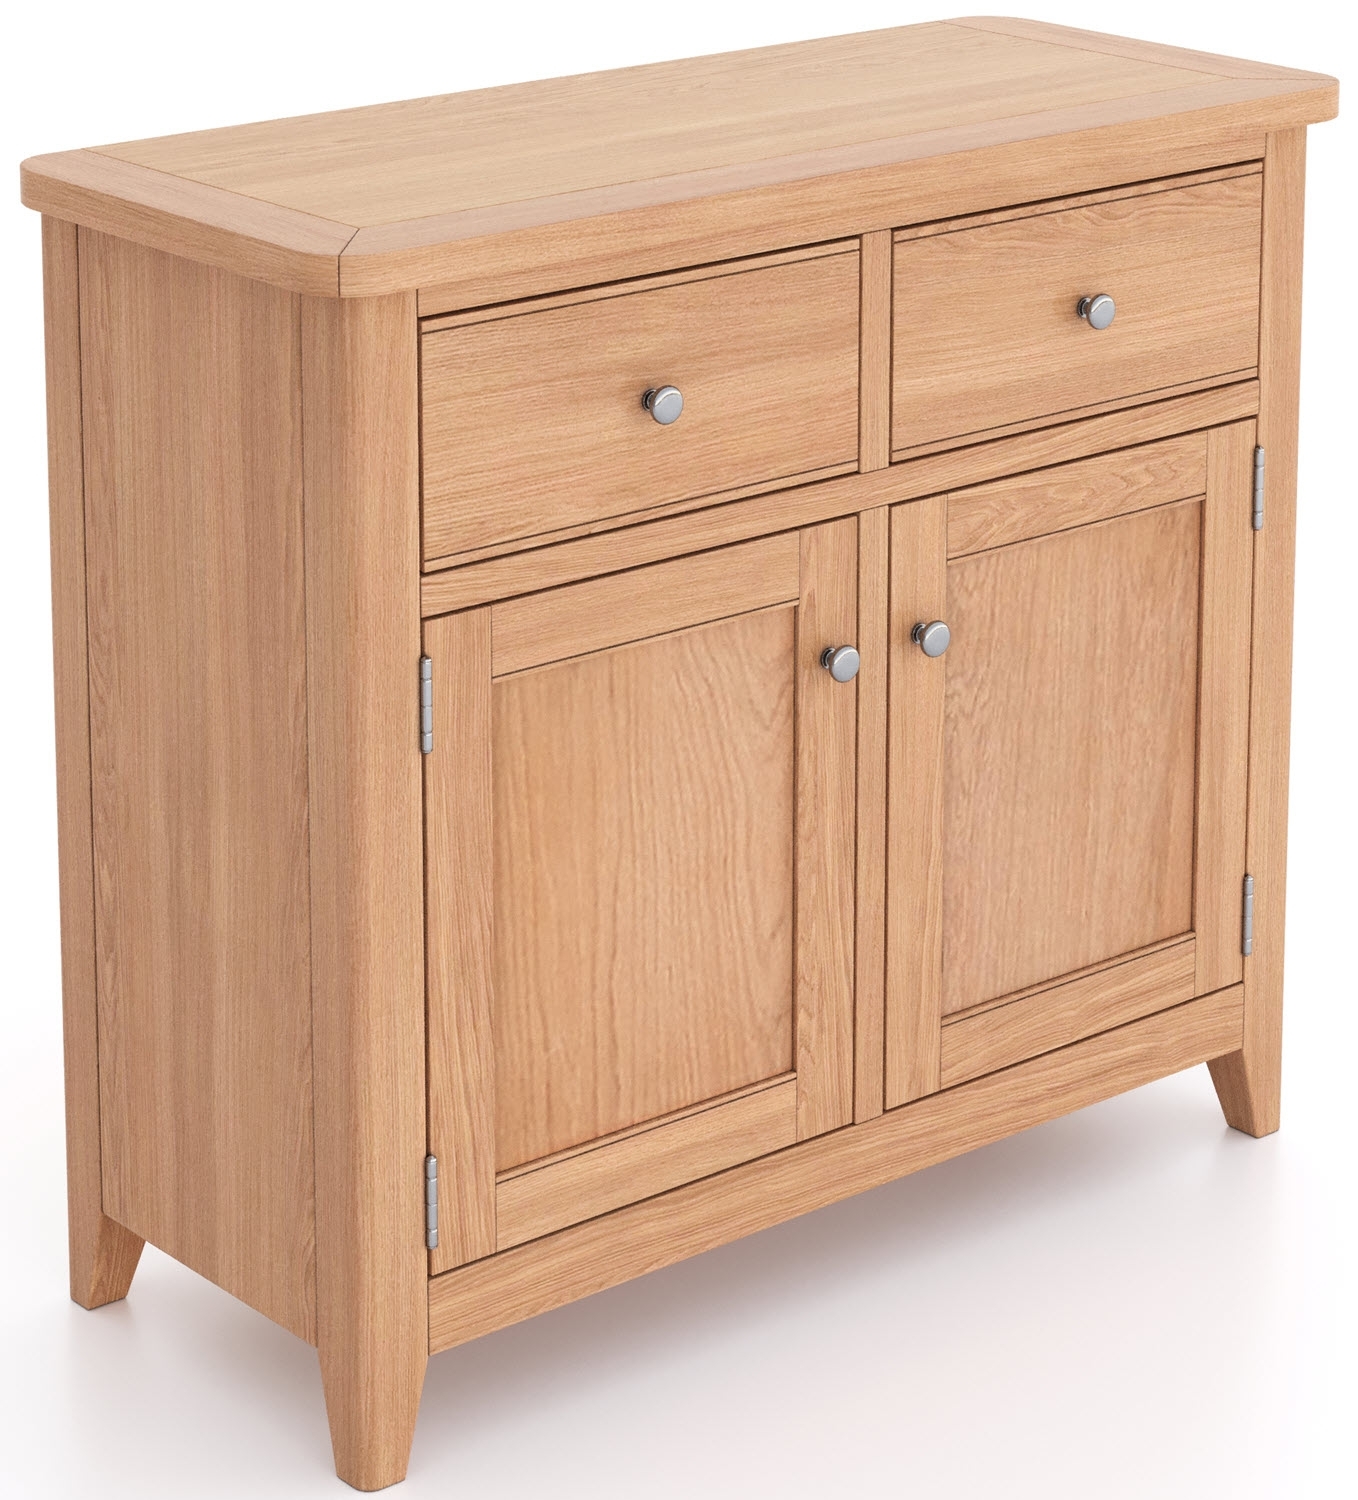 Arden Standard Sideboard 90cm With 2 Doors And 2 Drawers